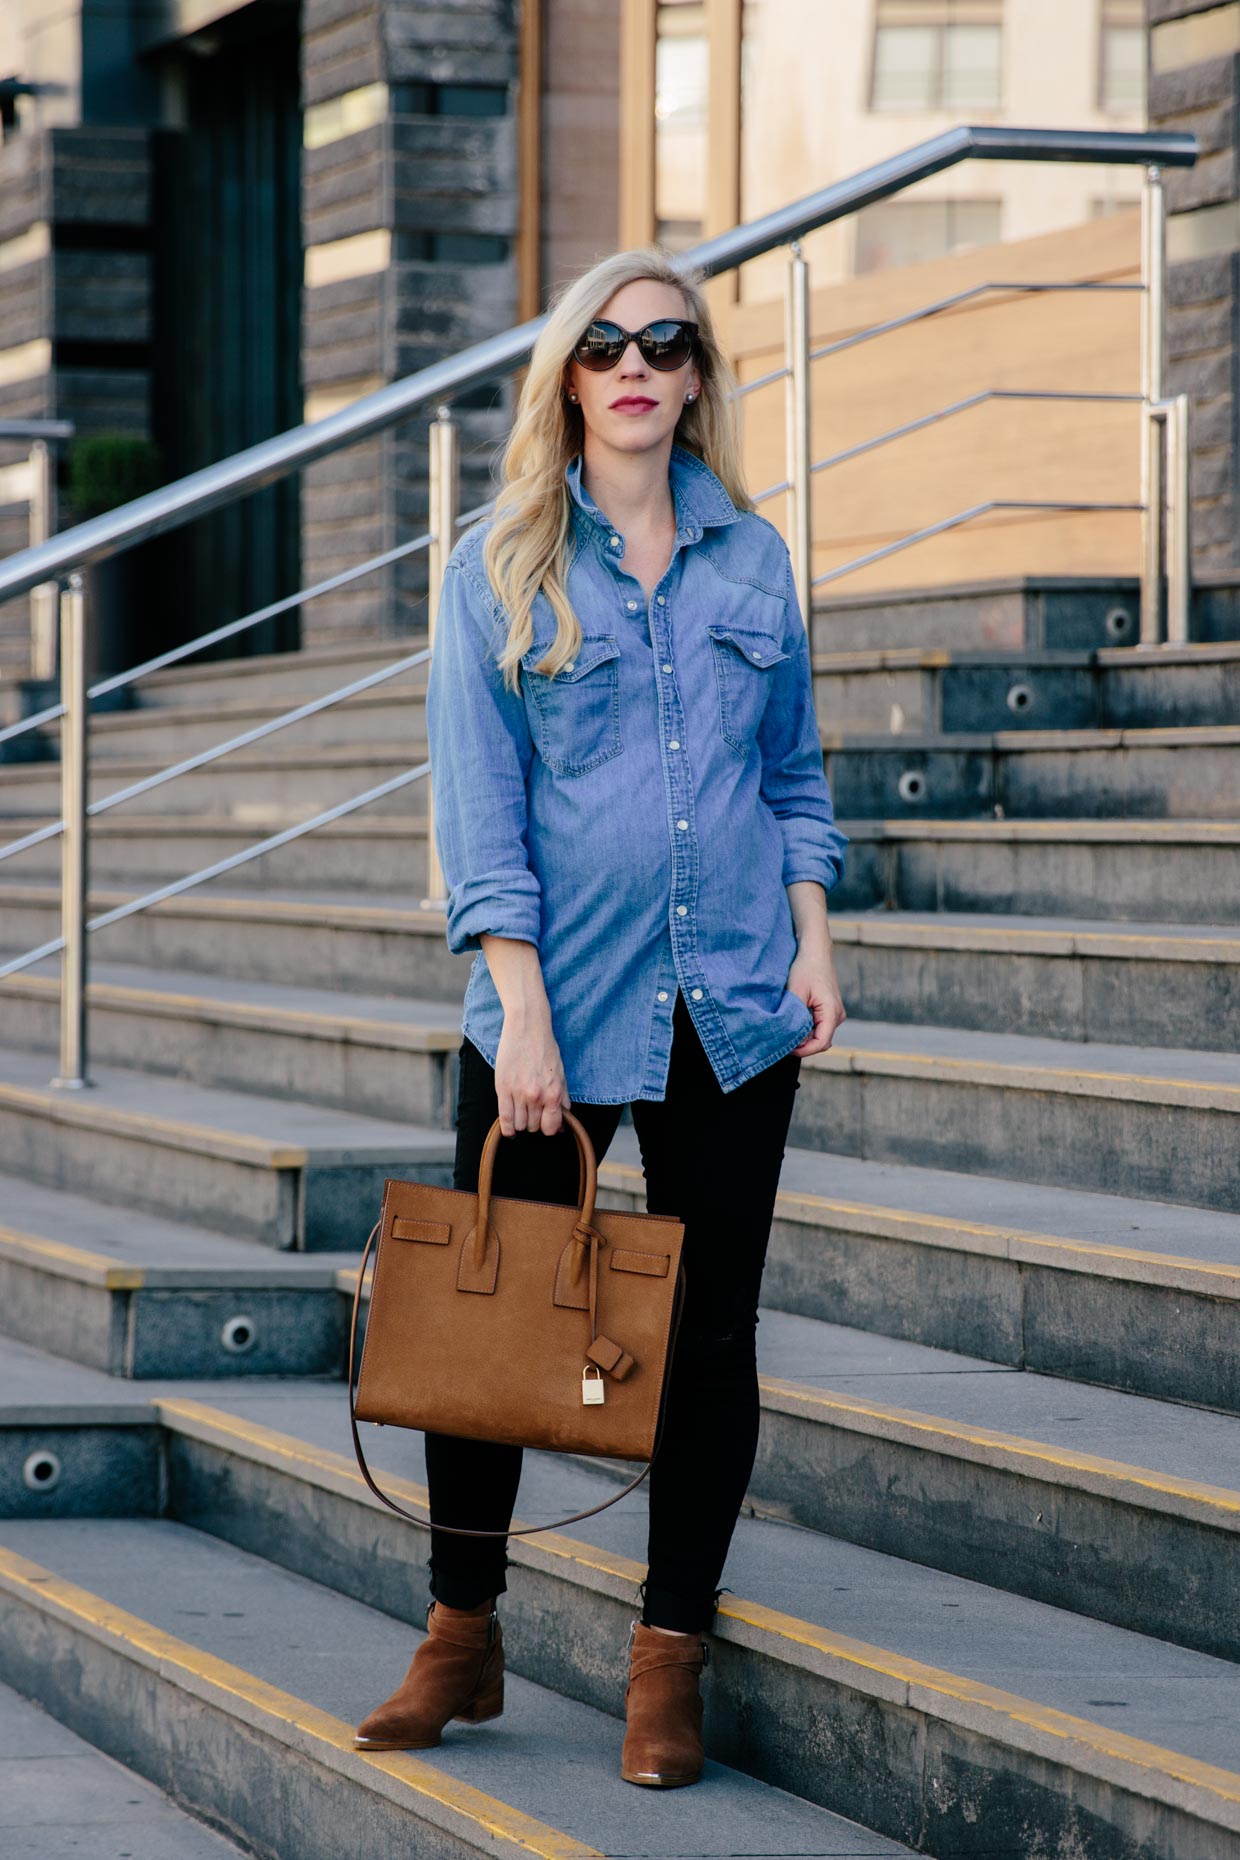 Western Oversized Denim Shirt with Black Jeans & Suede Boots Meagan's Moda